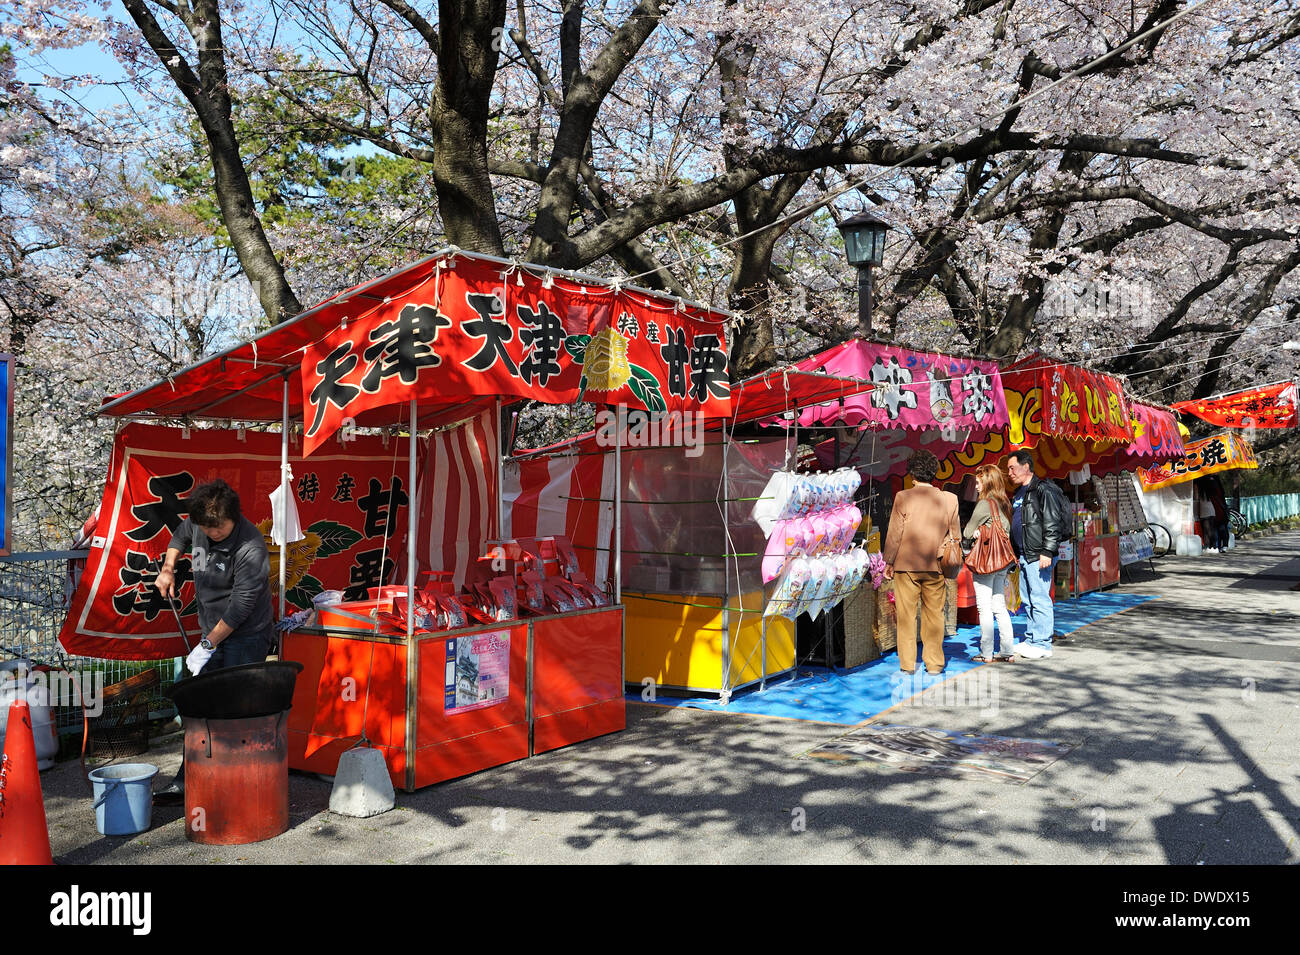 Japanese food stands in a park. Spring in Japan. Stock Photo